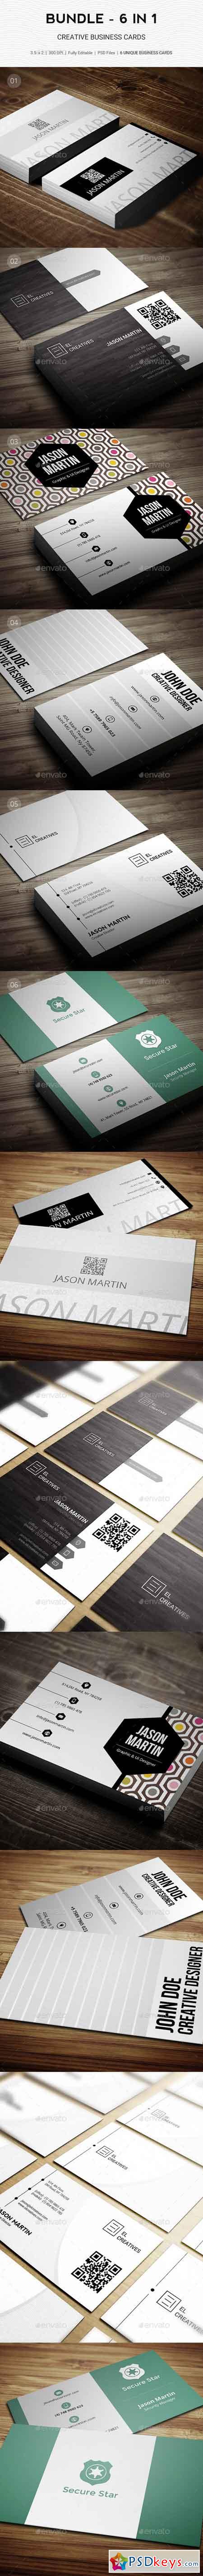 Bundle - Pro 6 in 1 - Creative Business Cards - B48 20602468